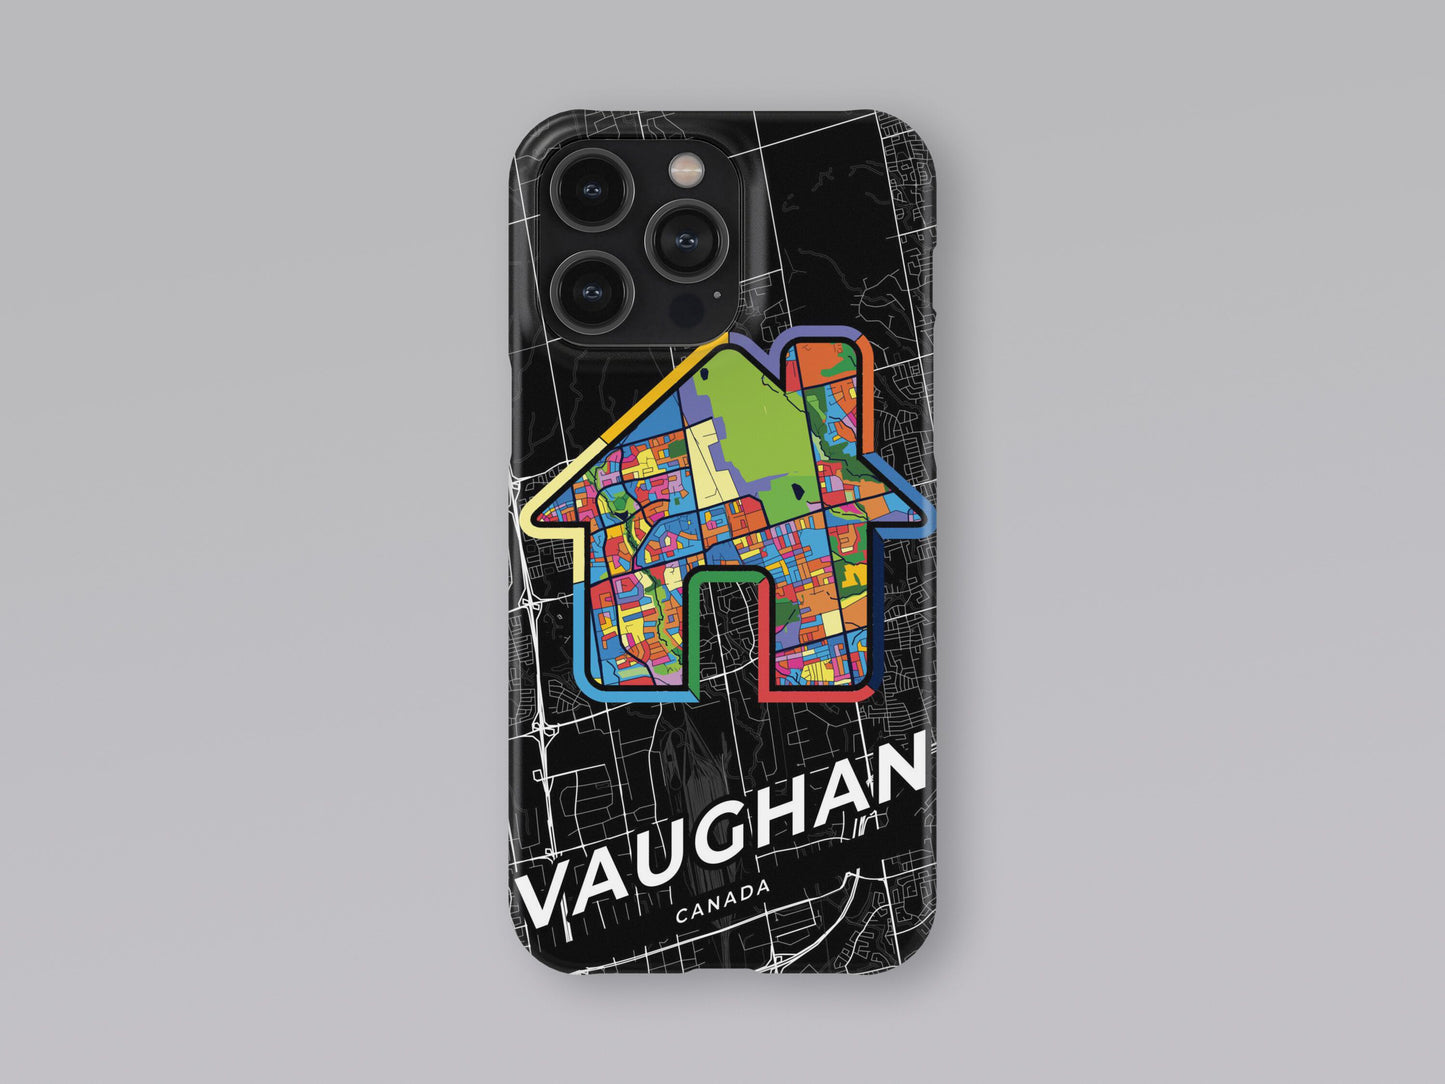 Vaughan Canada slim phone case with colorful icon 3